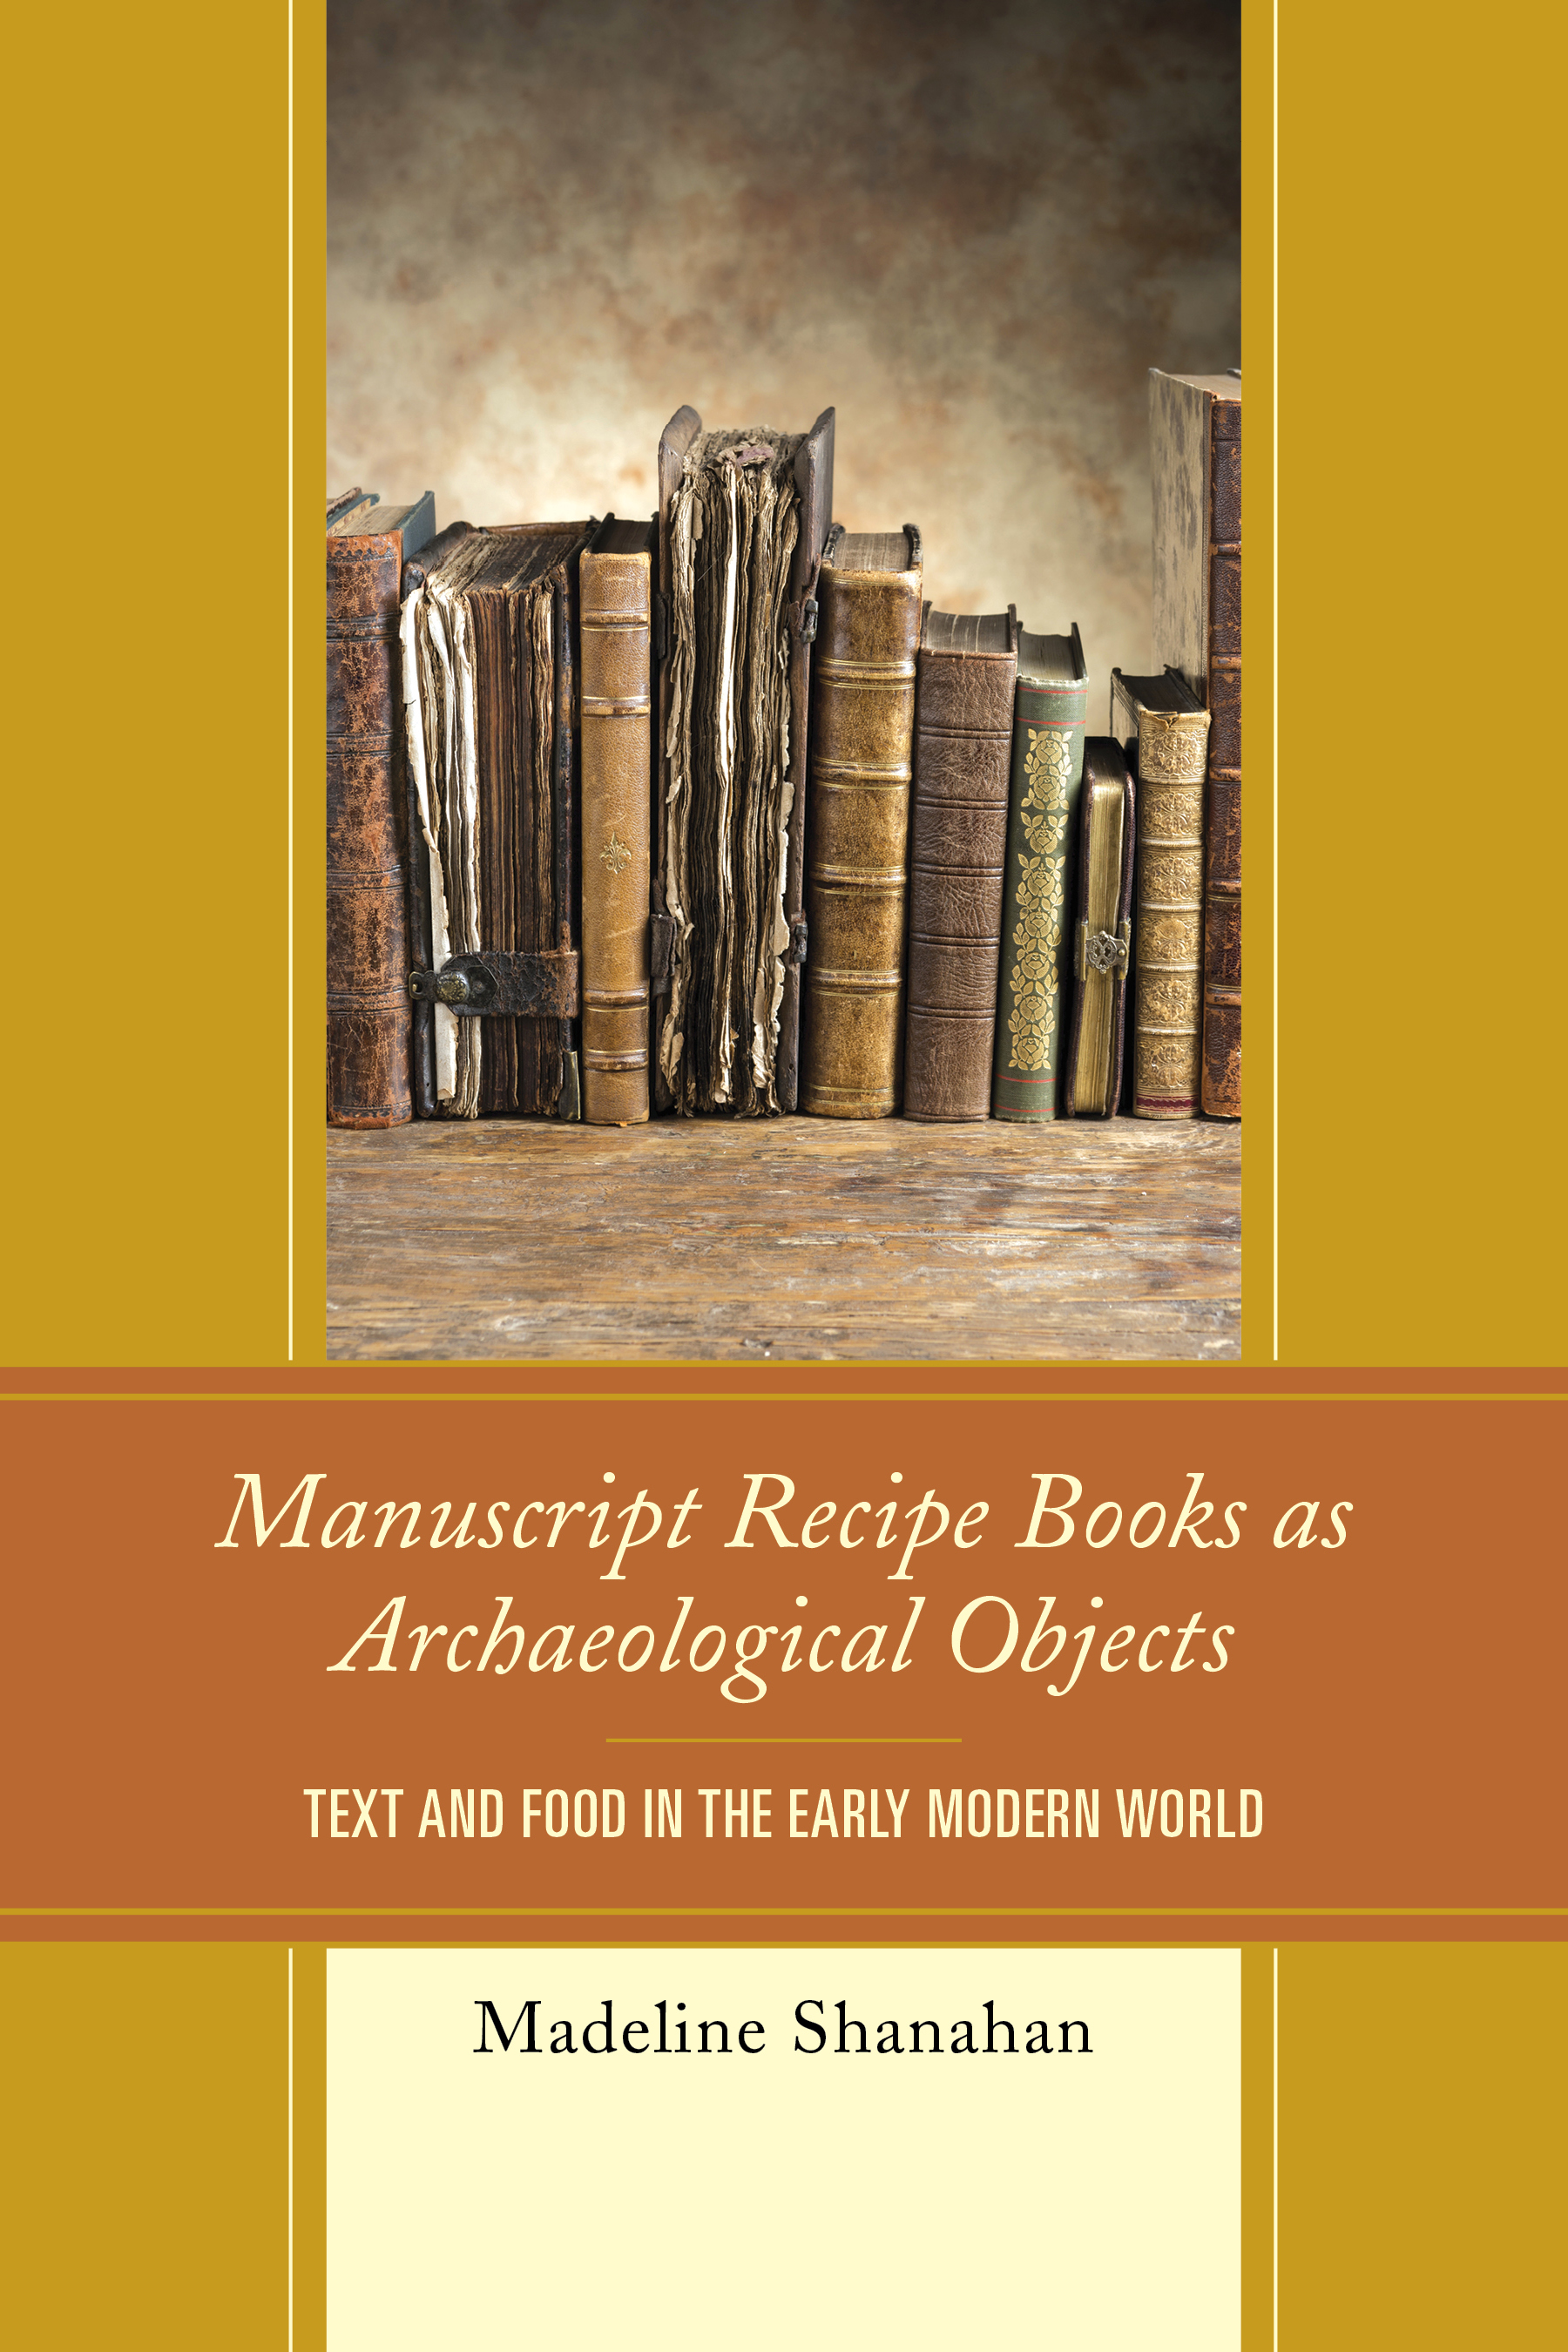 Manuscript Recipe Books as Archaeological Objects: Text and Food in the Early Modern World